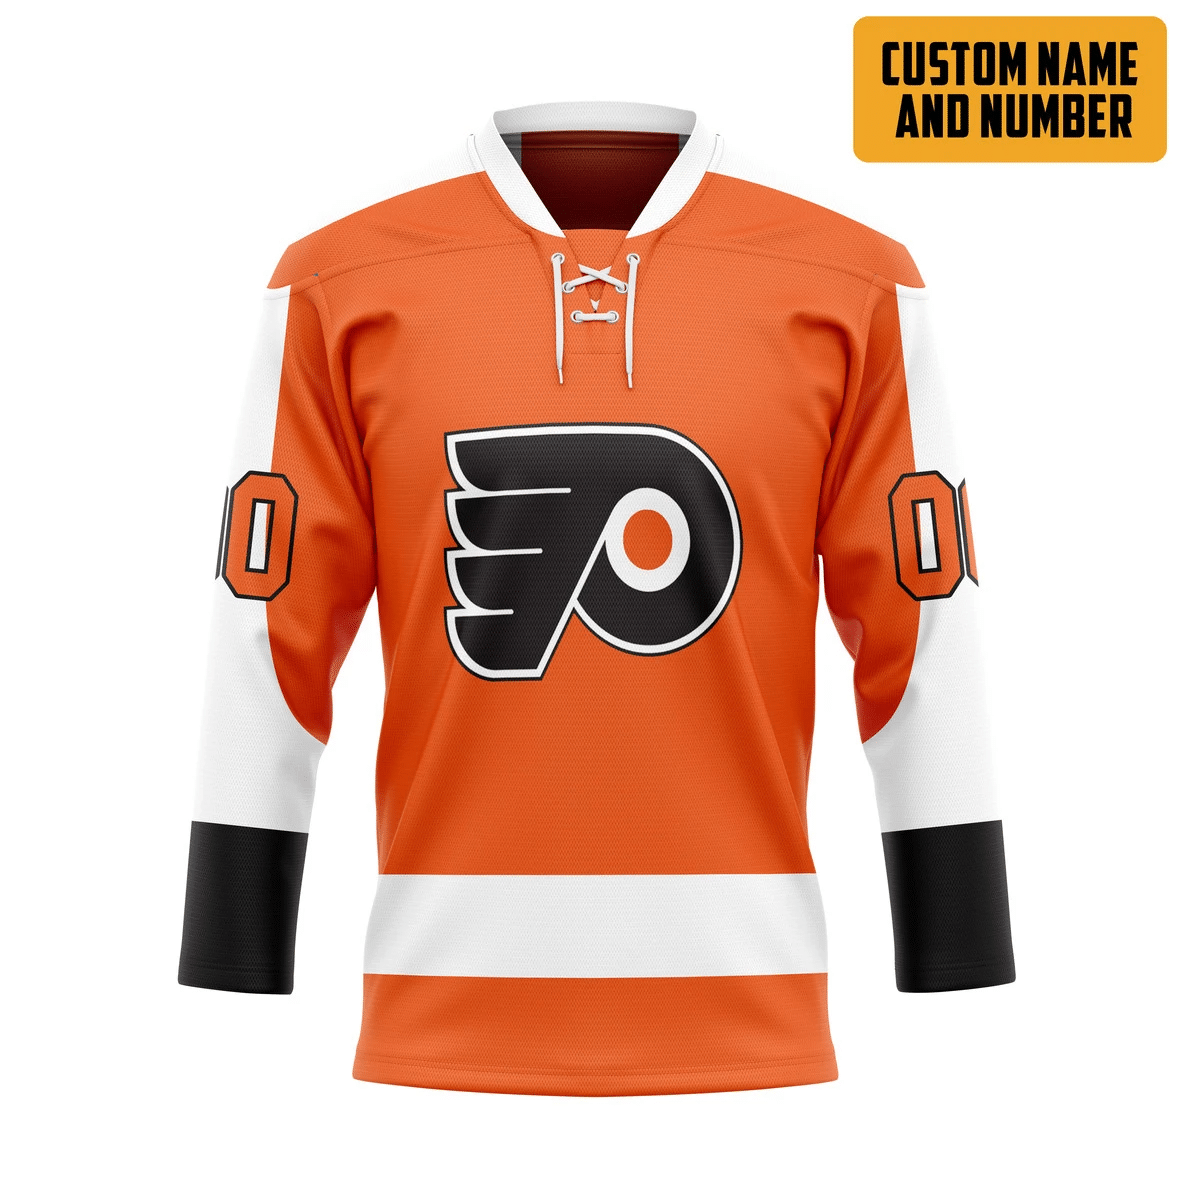 The hockey jersey is a must for every player in a team. 26